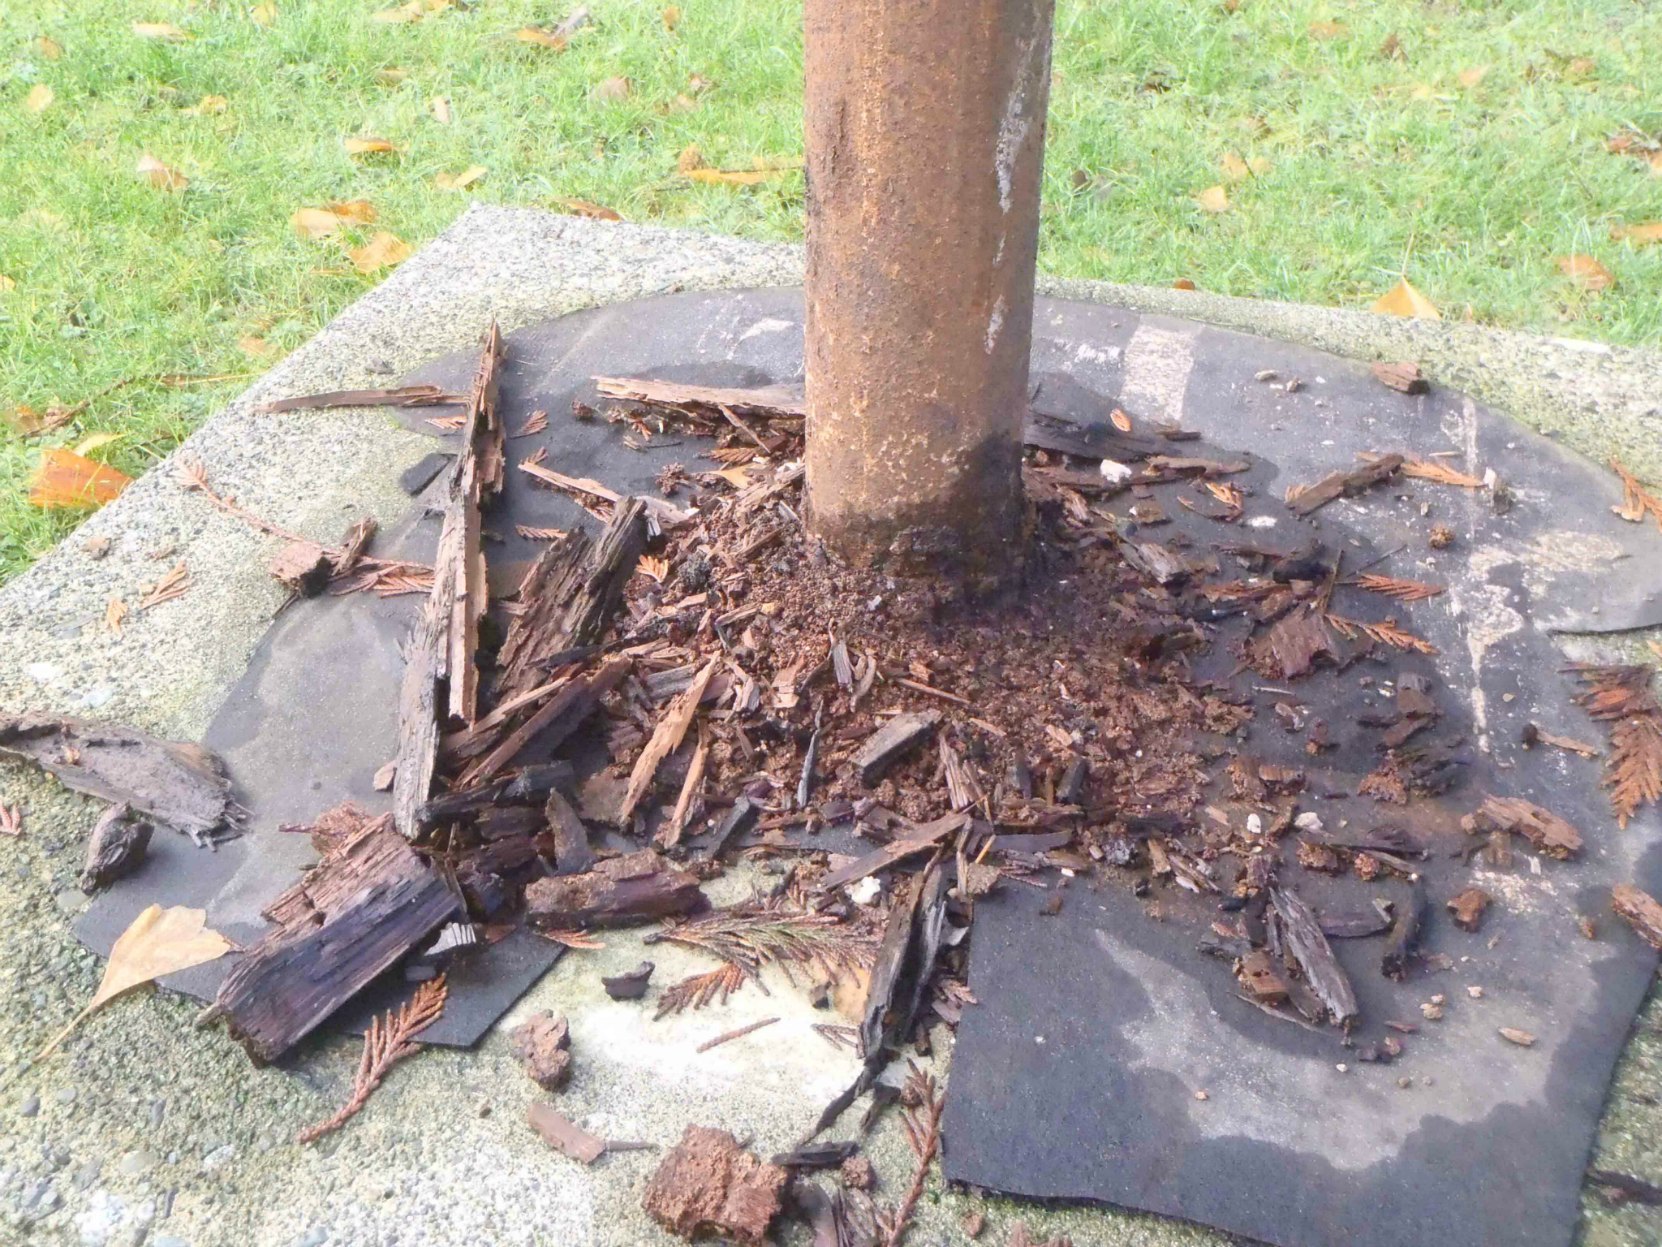 Pole of Wealth support stand showing ant and rot damage, January 2016